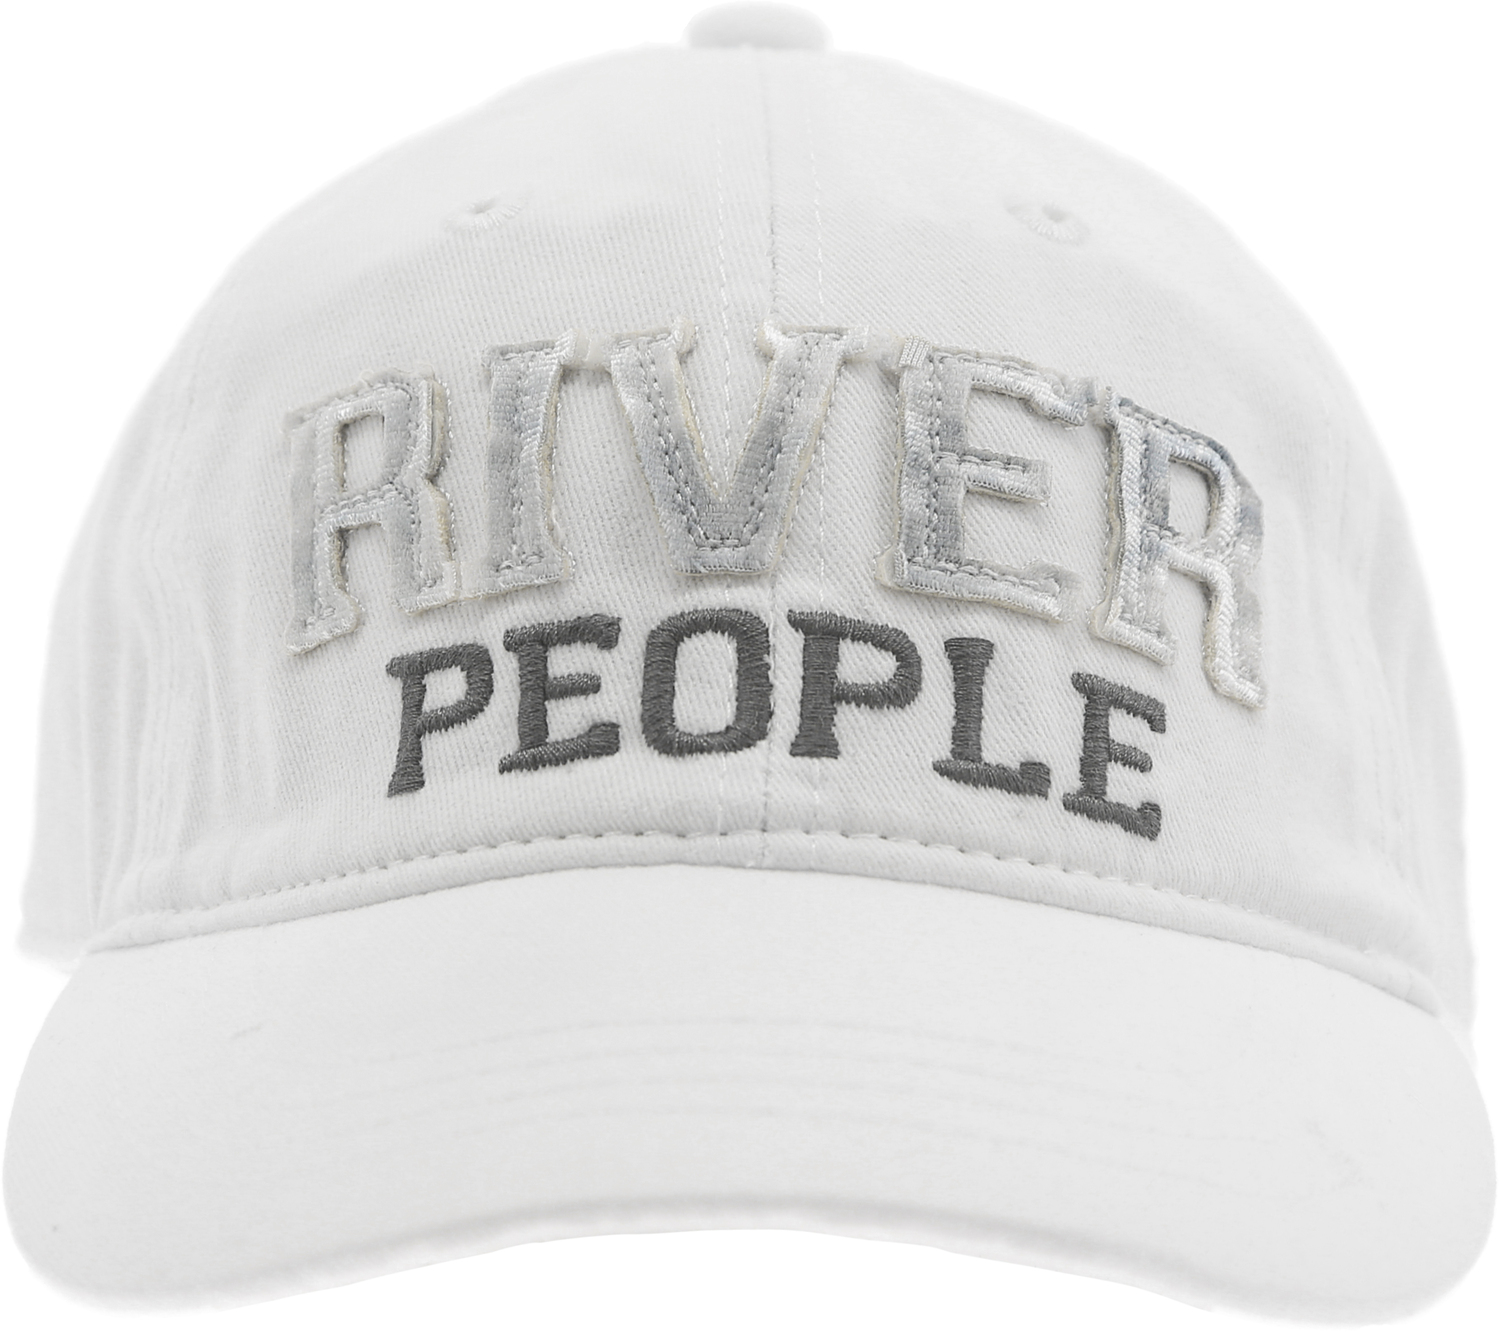 River People by We People - River People - White Adjustable Hat